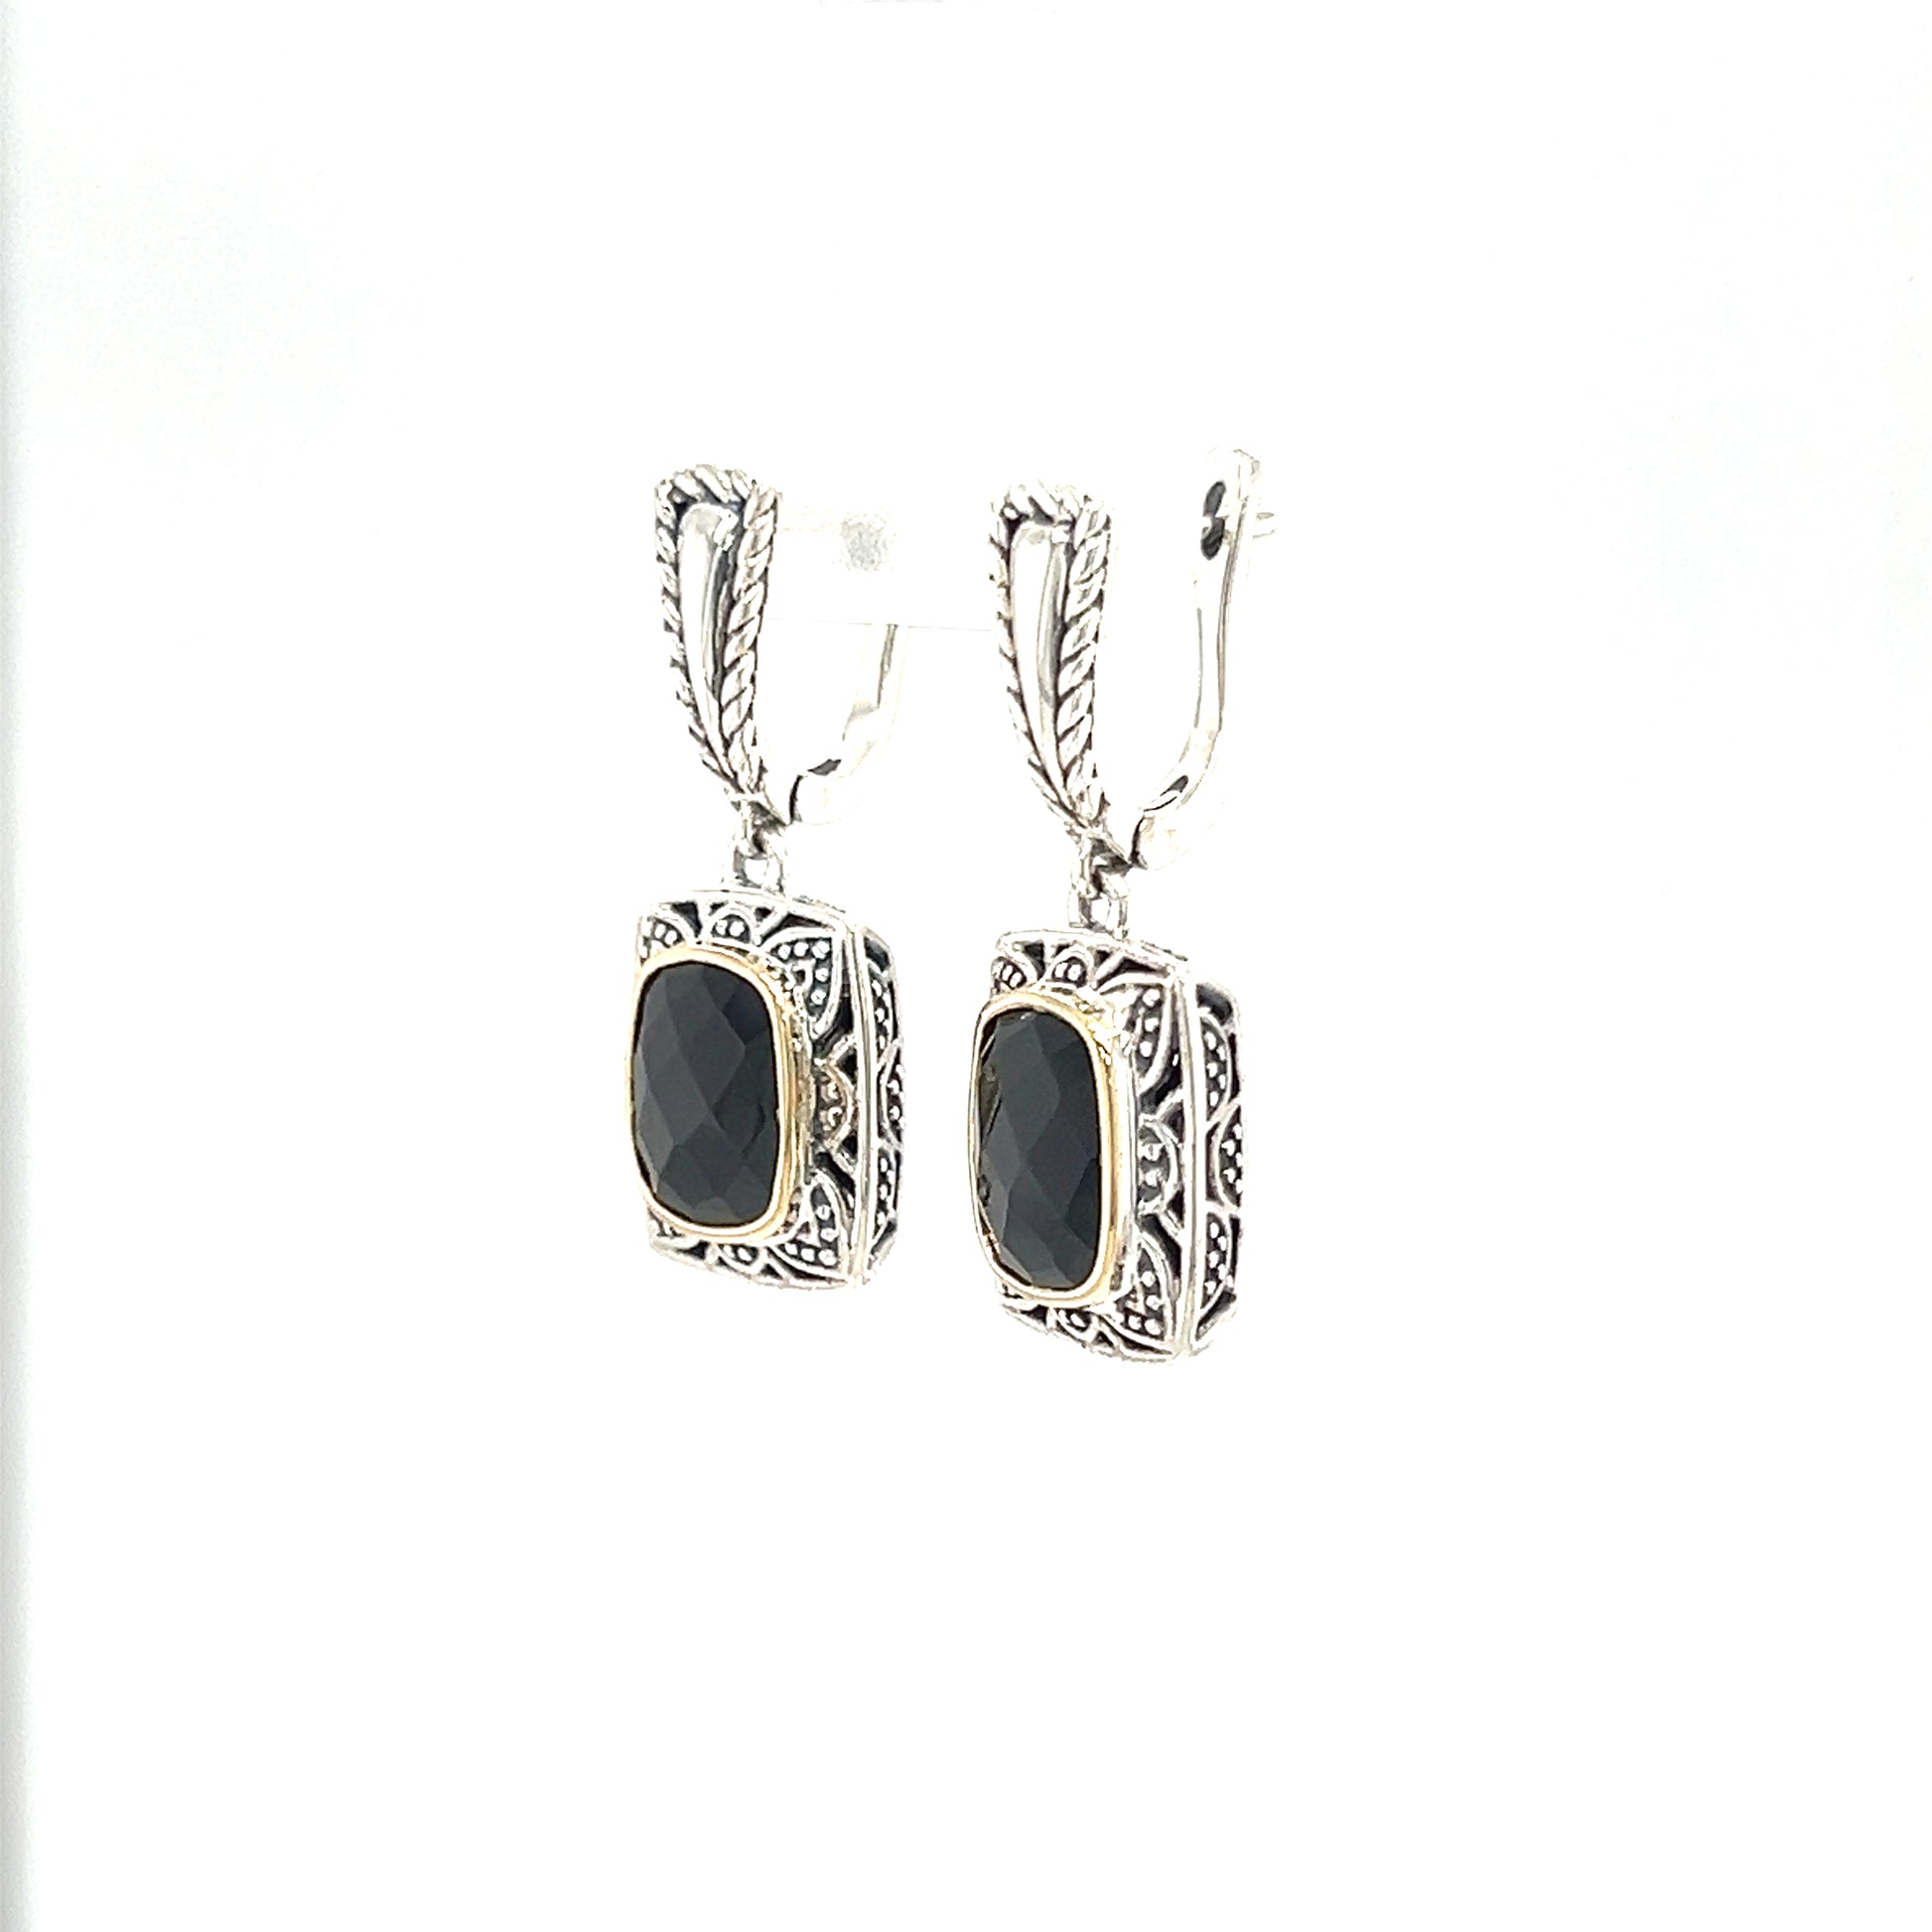 Onyx Dangle Earrings with 14K Yellow Gold Accents in Sterling Silver Left Side